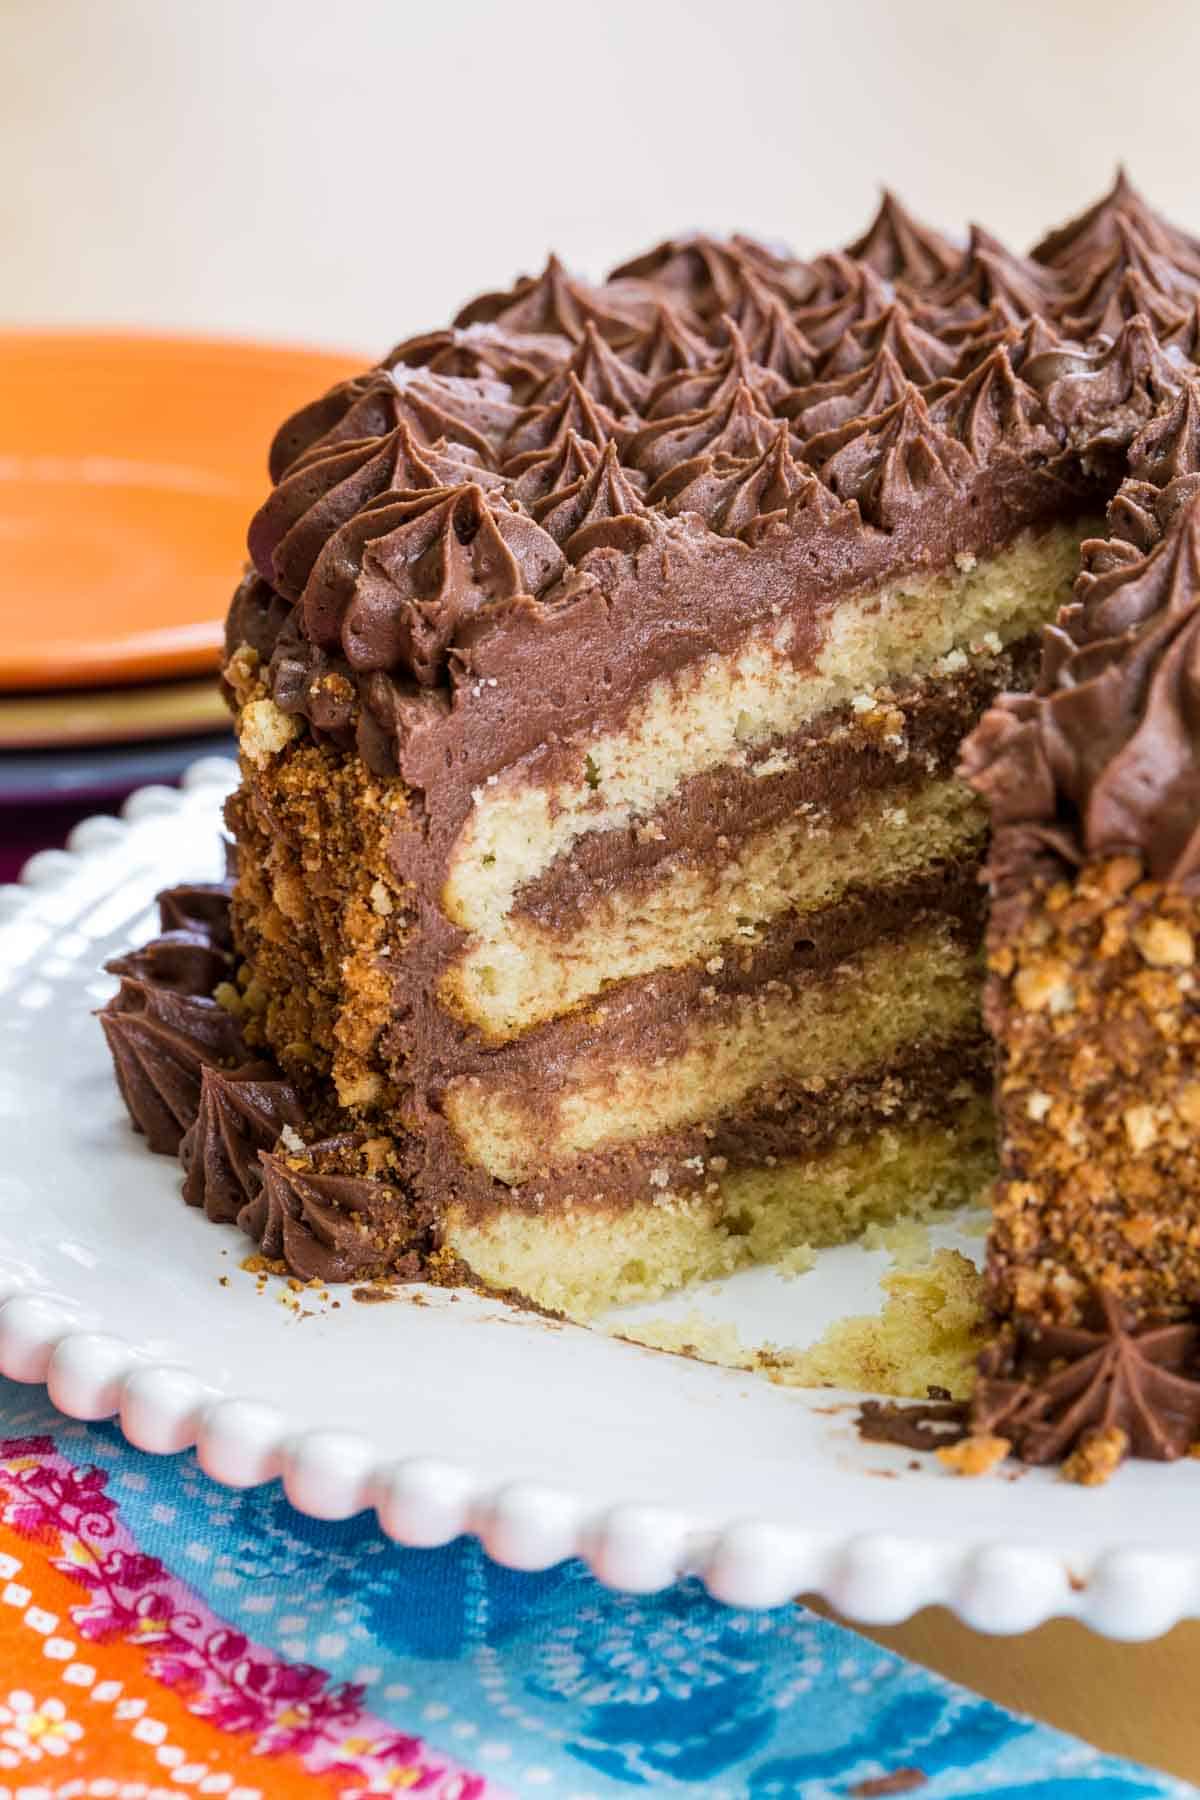 A yellow layer cake with chocolate frosting on a platter with a slice removed.